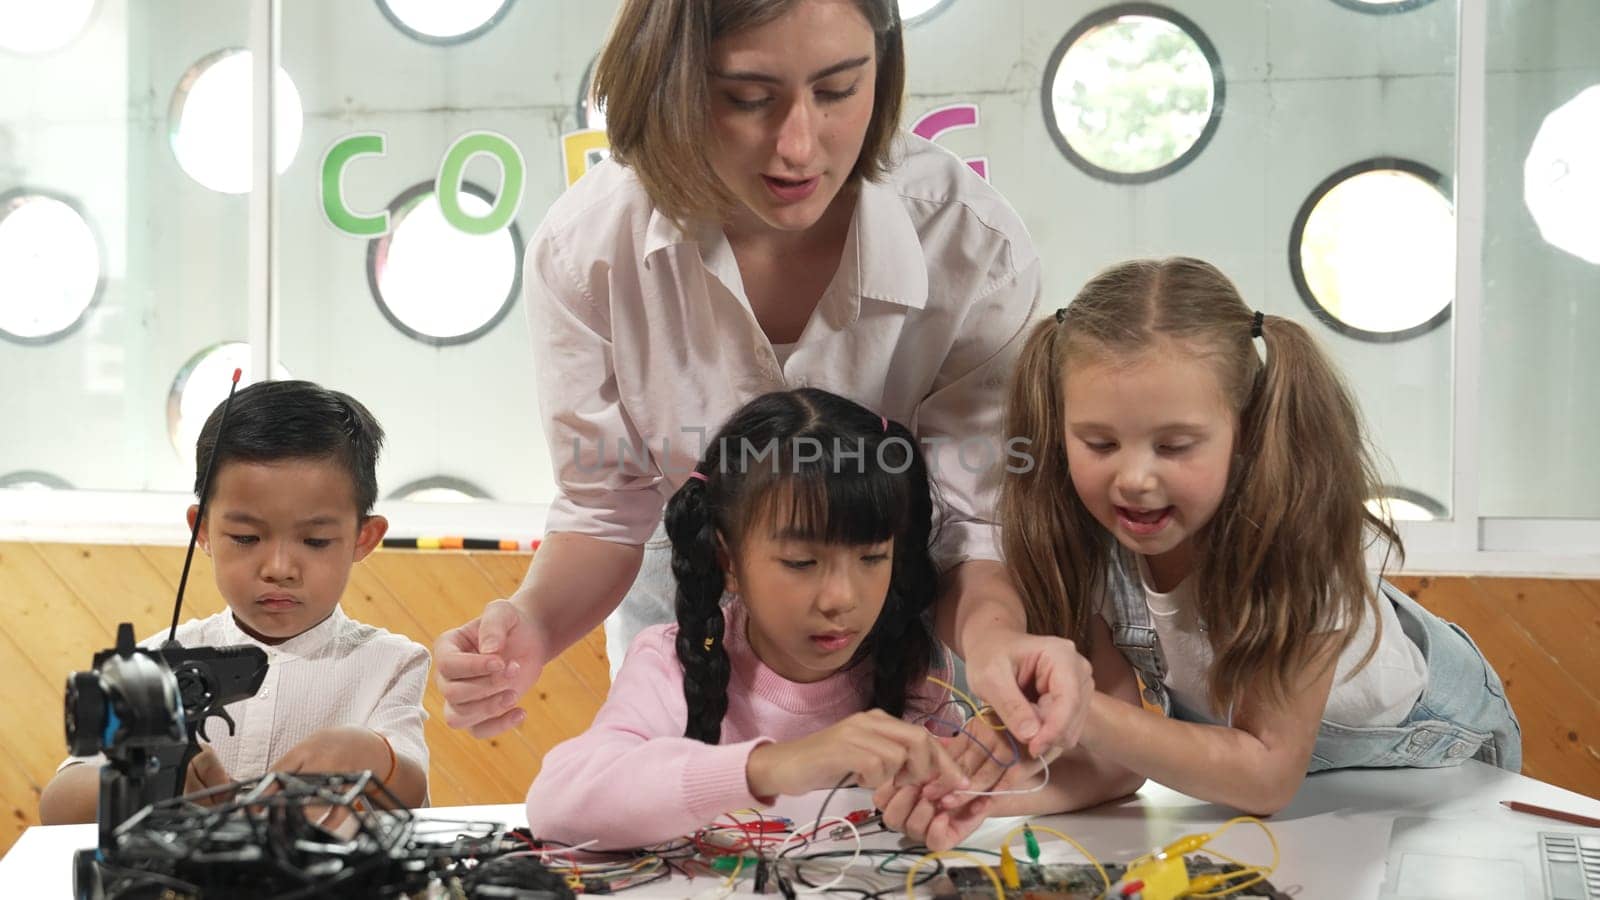 Teacher looking at children while diverse student looking at screen. Children excited in presentation while drawing or writing art books at table with toys and color pencil placed on table. Erudition.